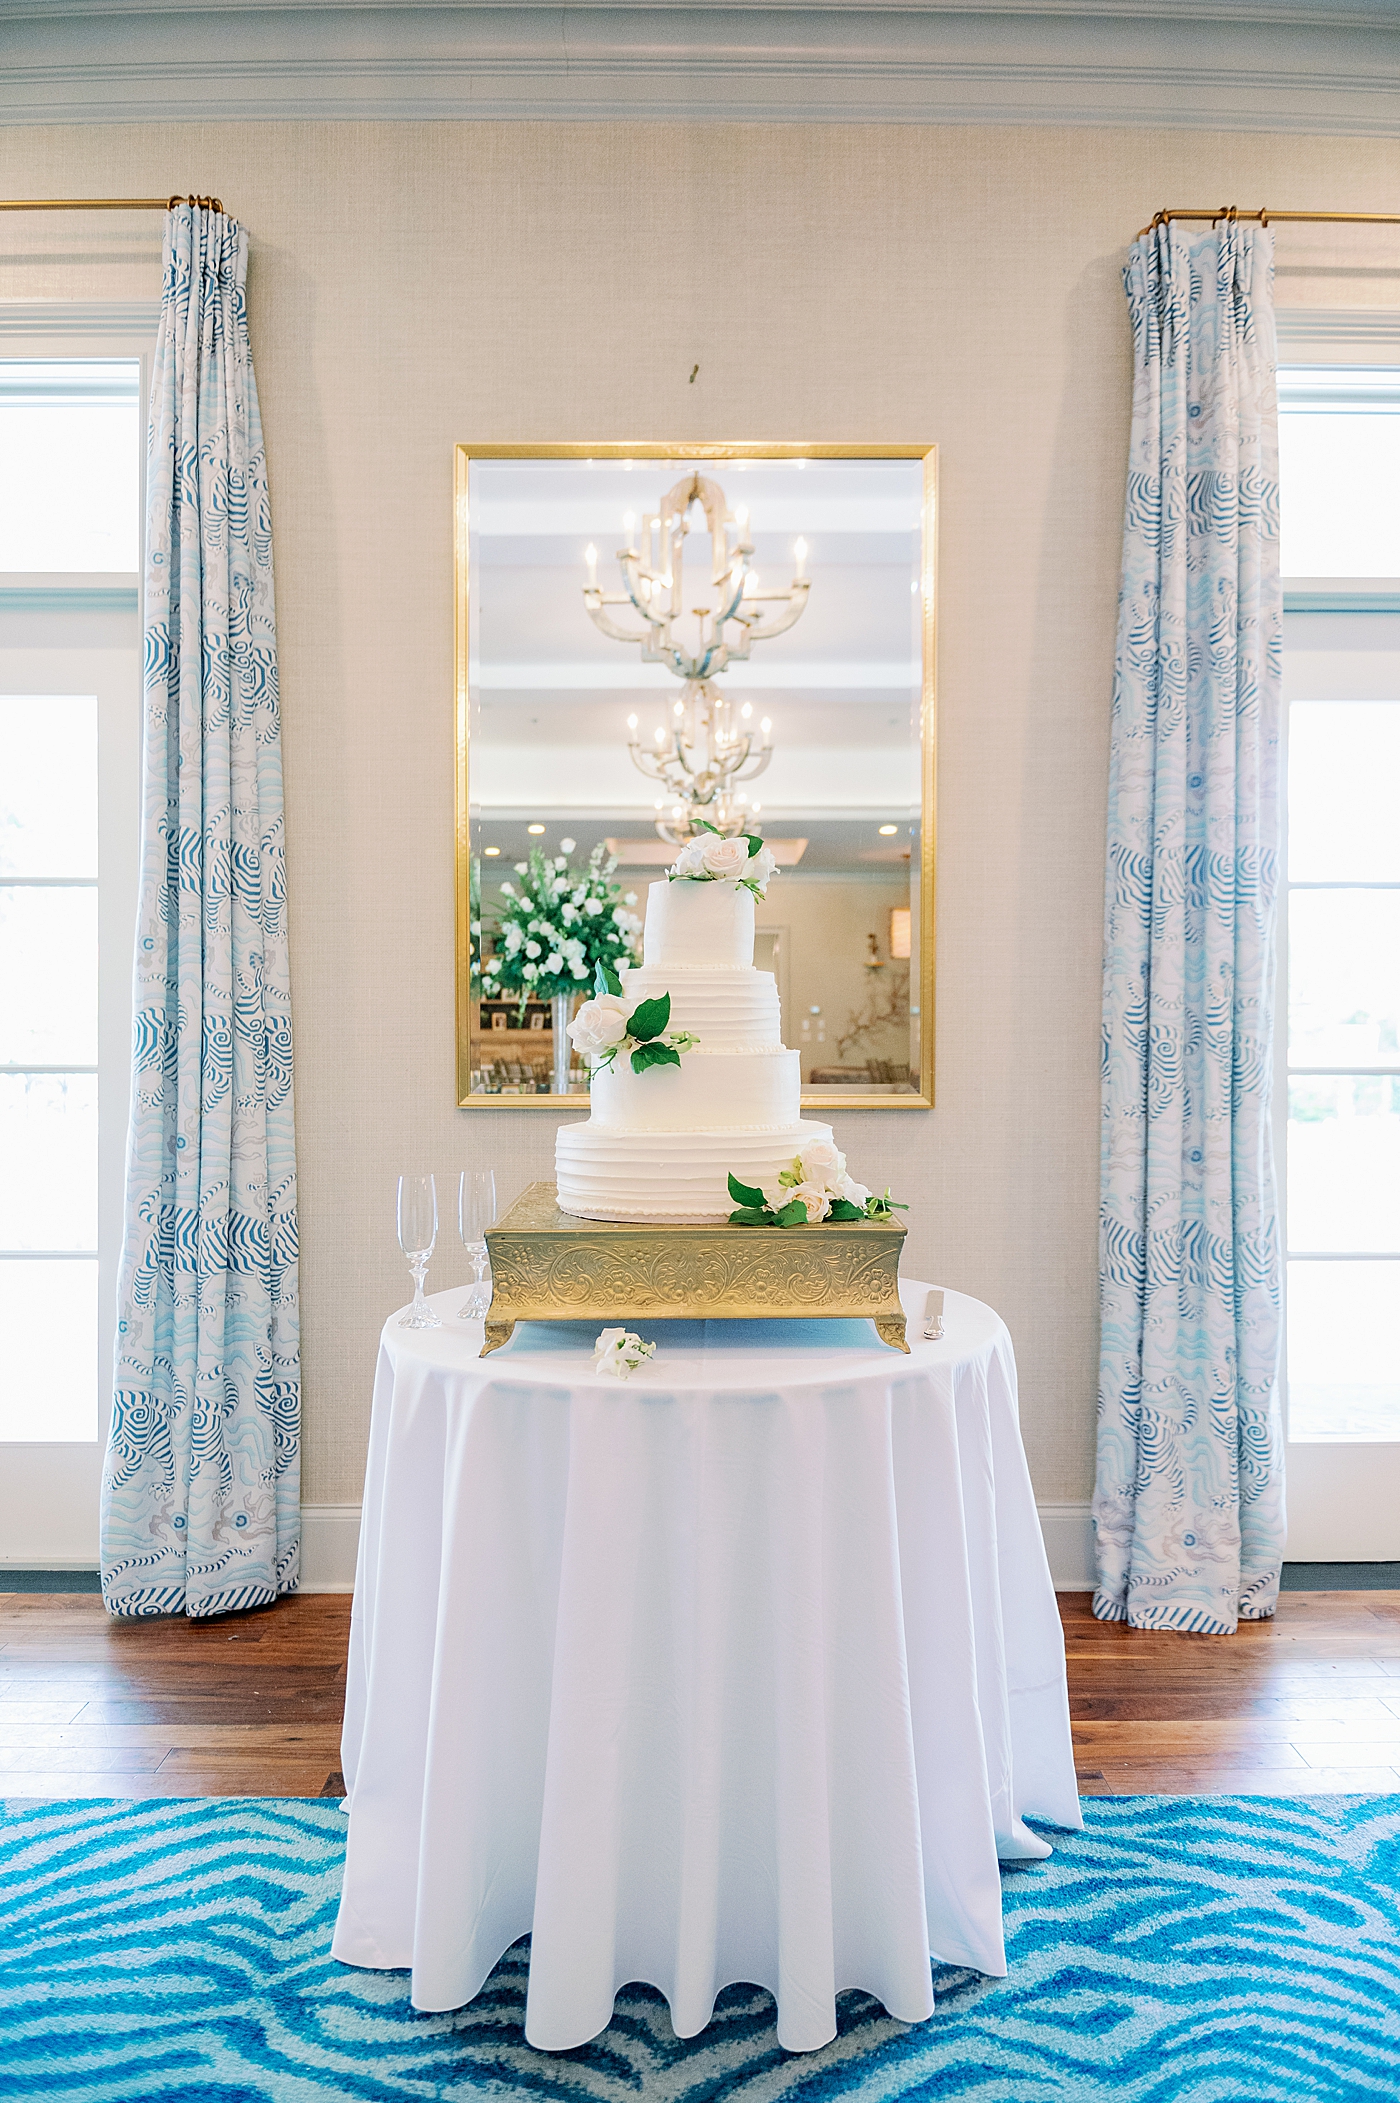 Wedding cake on a white table | Image by Annie Laura Photo